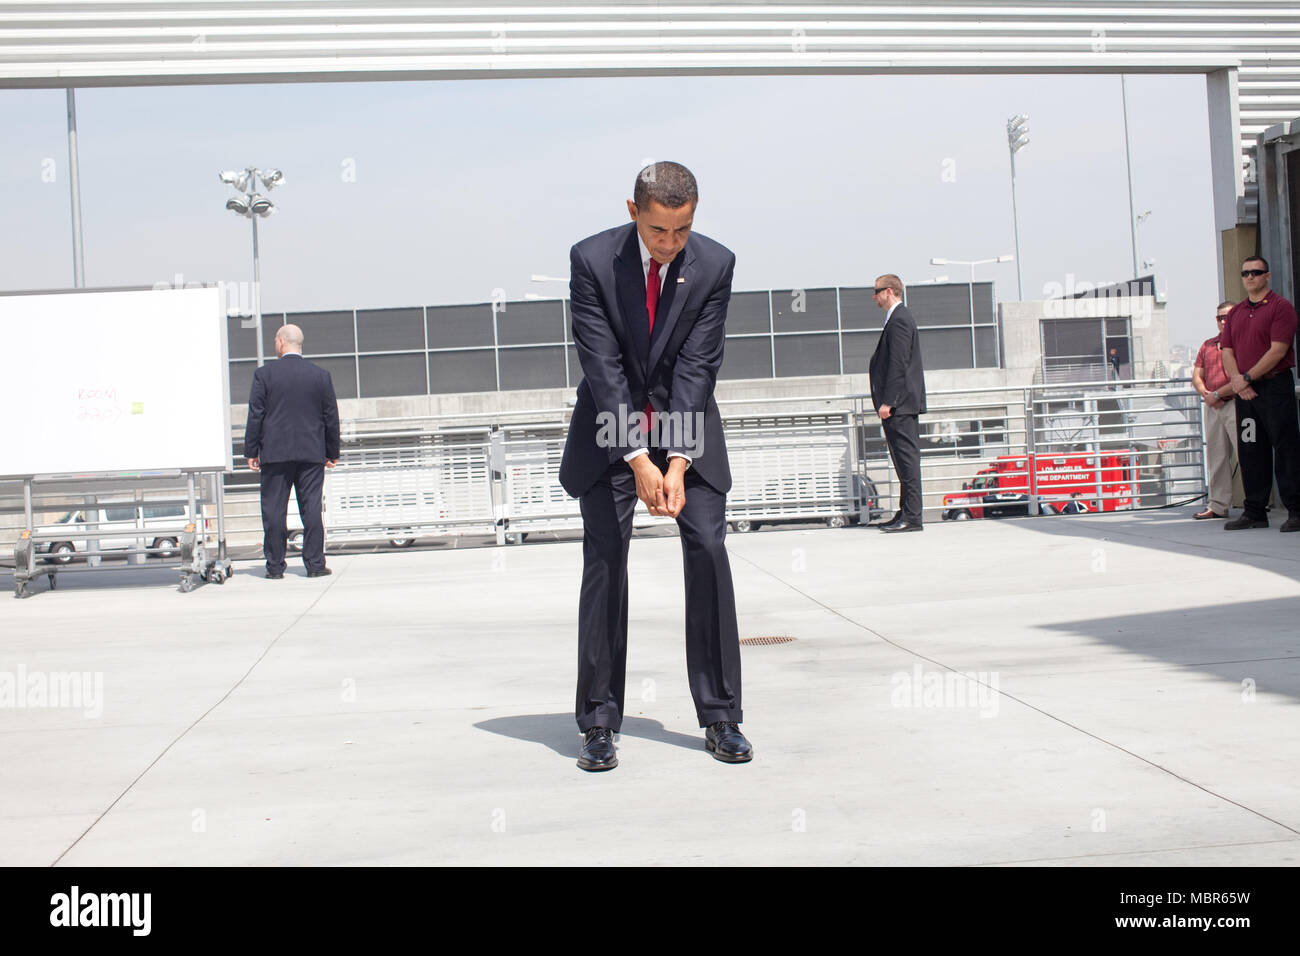 President Barack Obama practices his golf swing at an outdoor hold prior to an event at the Miguel Contreras Learning Center, Los Angeles, California 3/19/09.. Official White House Photo by Pete Souza. Stock Photo